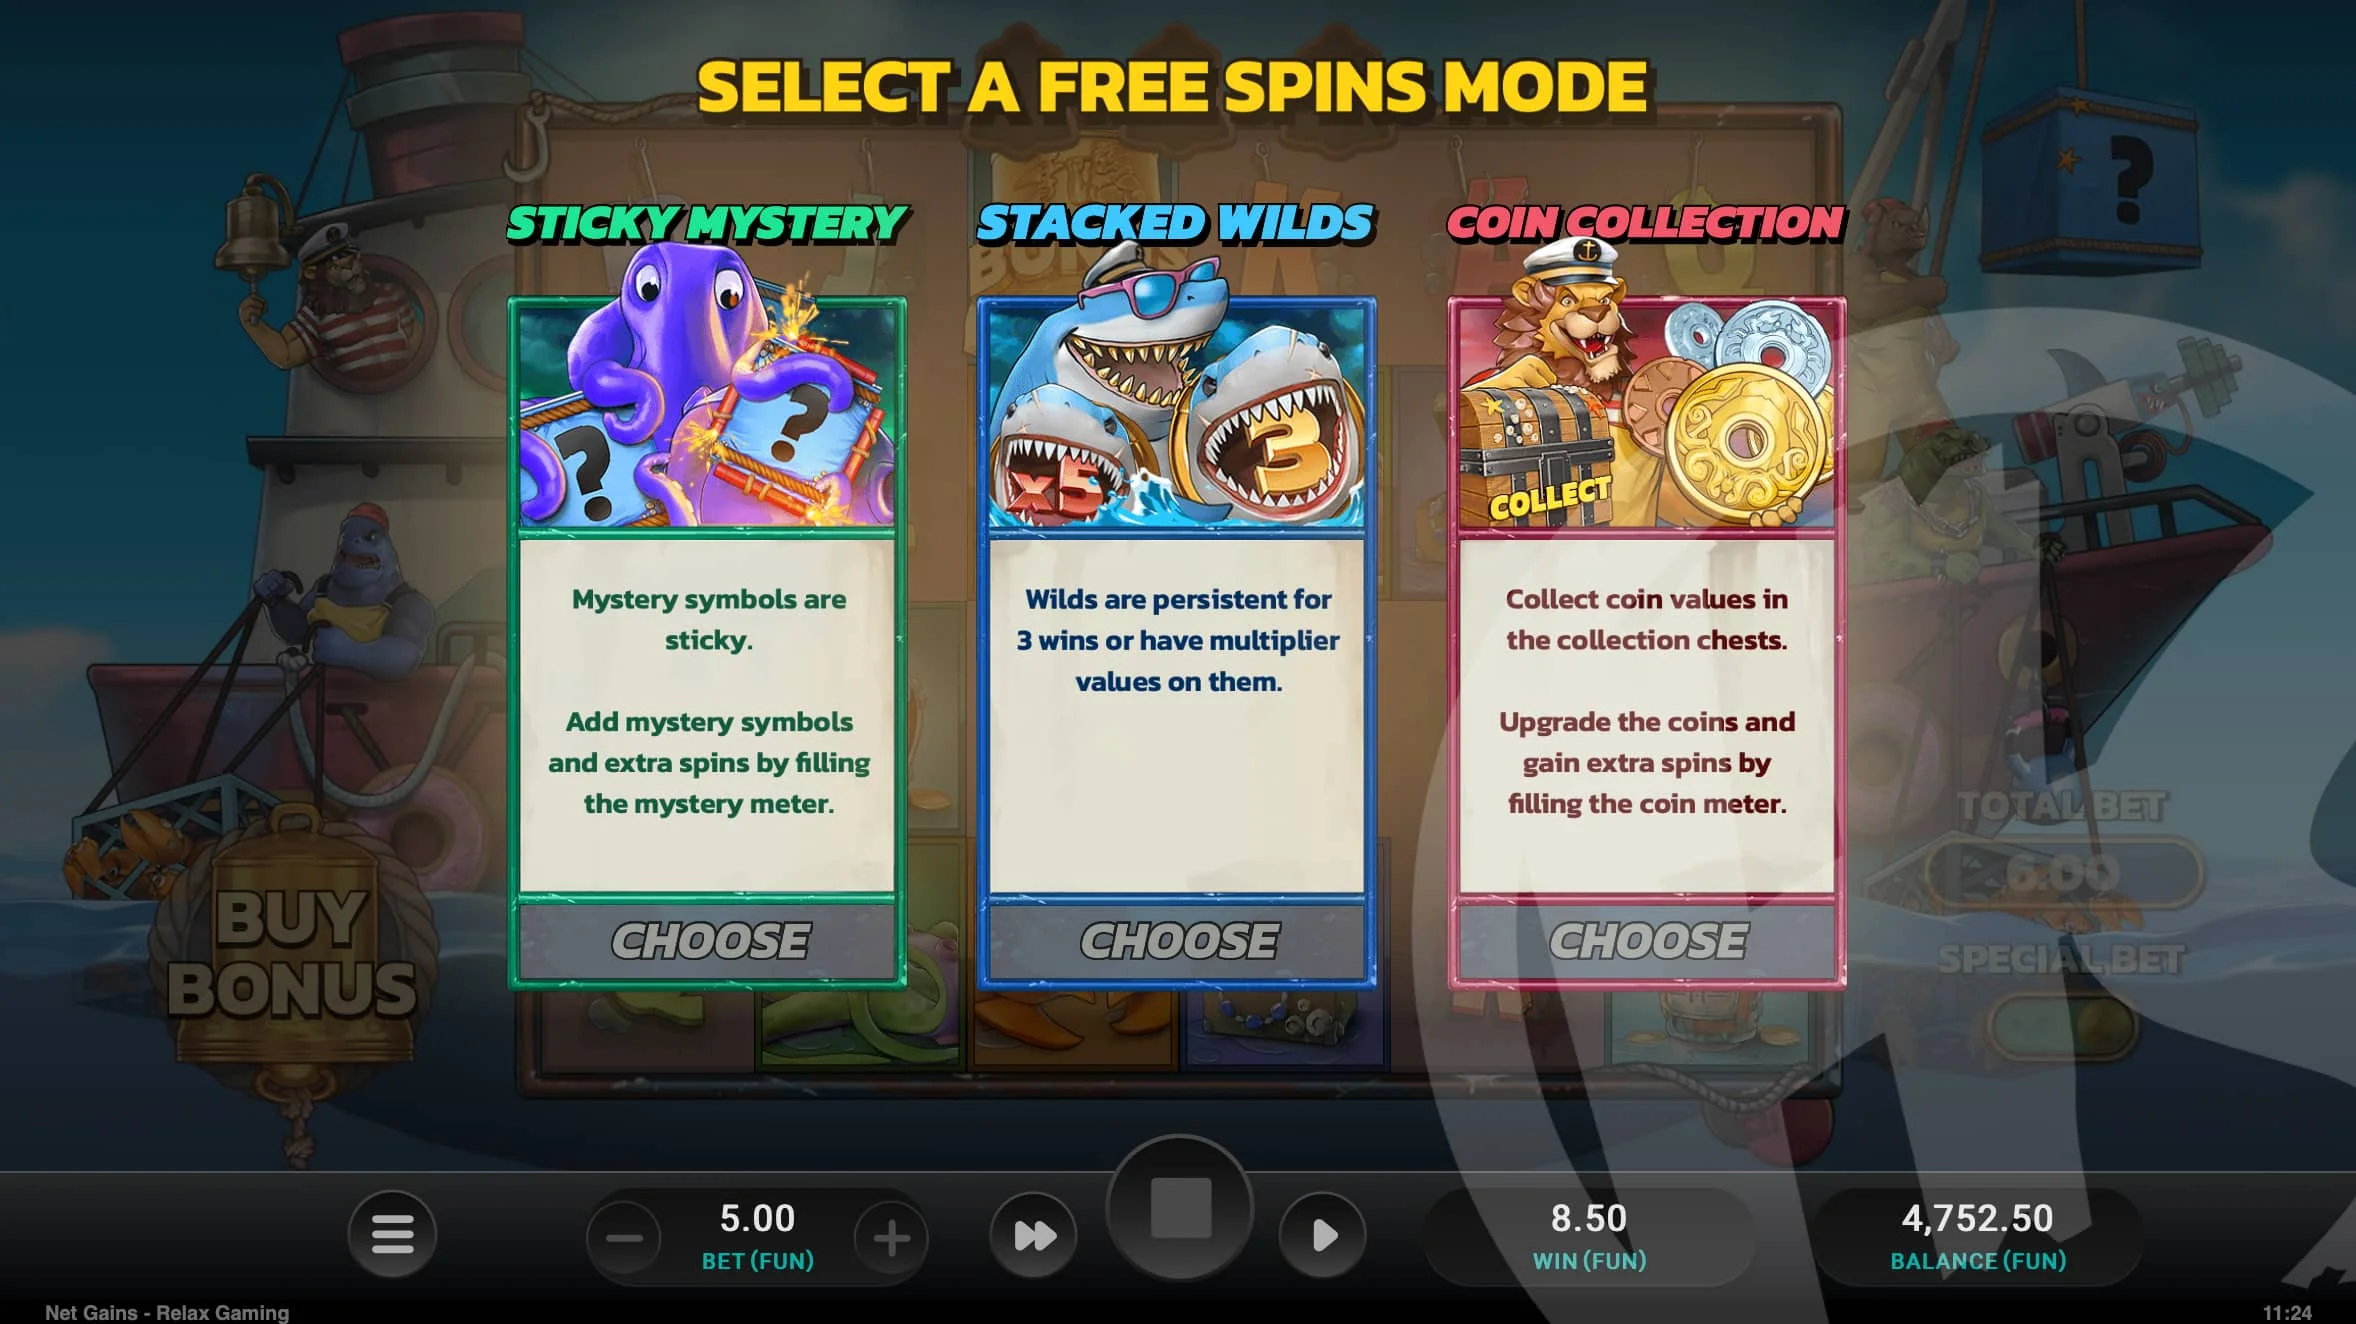 Land 3 Bonus Symbols To Trigger Free Spins, With a Choice of 3 Modes